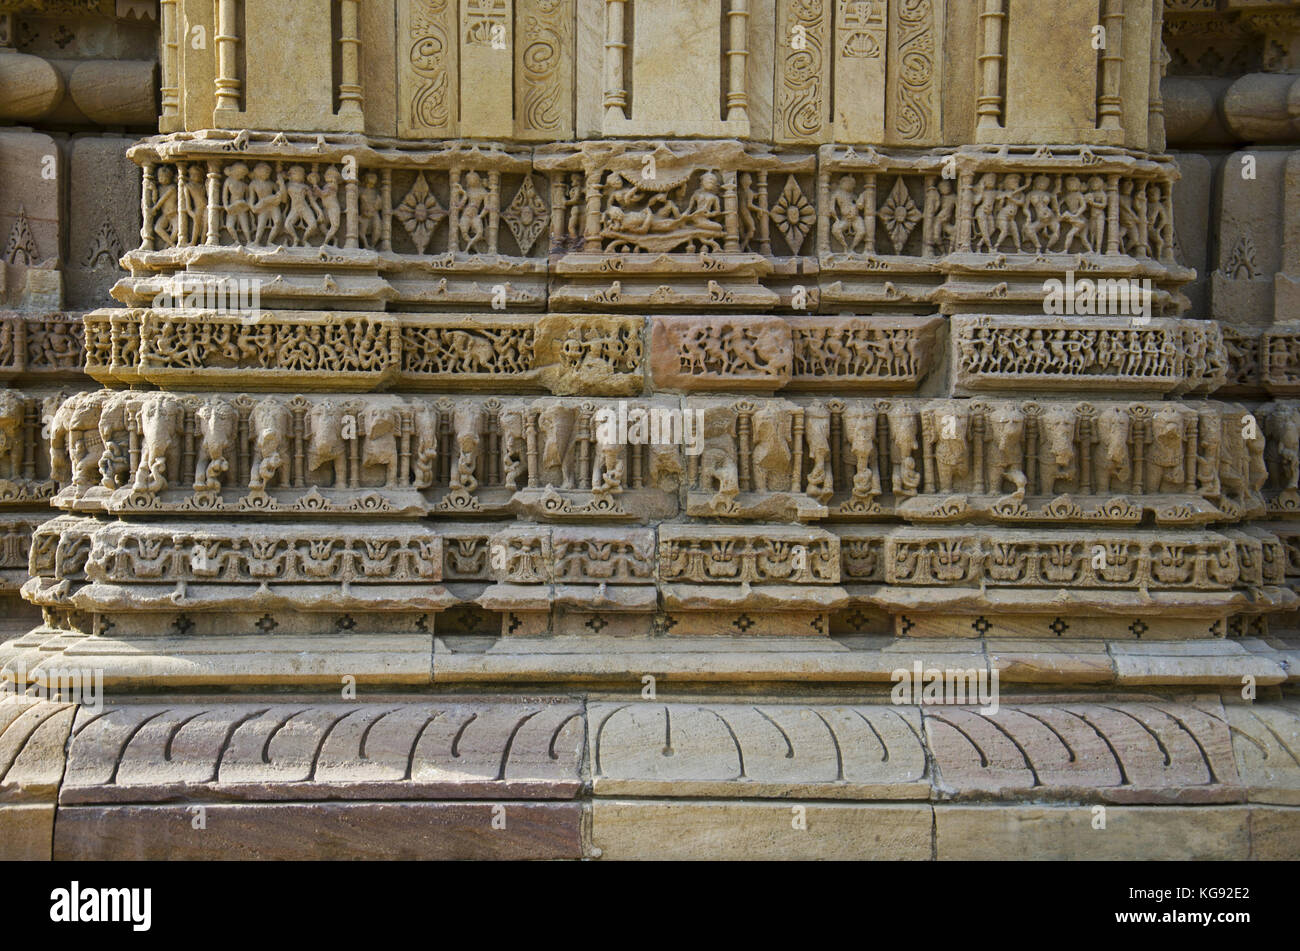 Carving details on the outer wall of the Sun Temple. Built in 1026 - 27 AD during the reign of Bhima I of the Chaulukya dynasty, Modhera village of Me Stock Photo